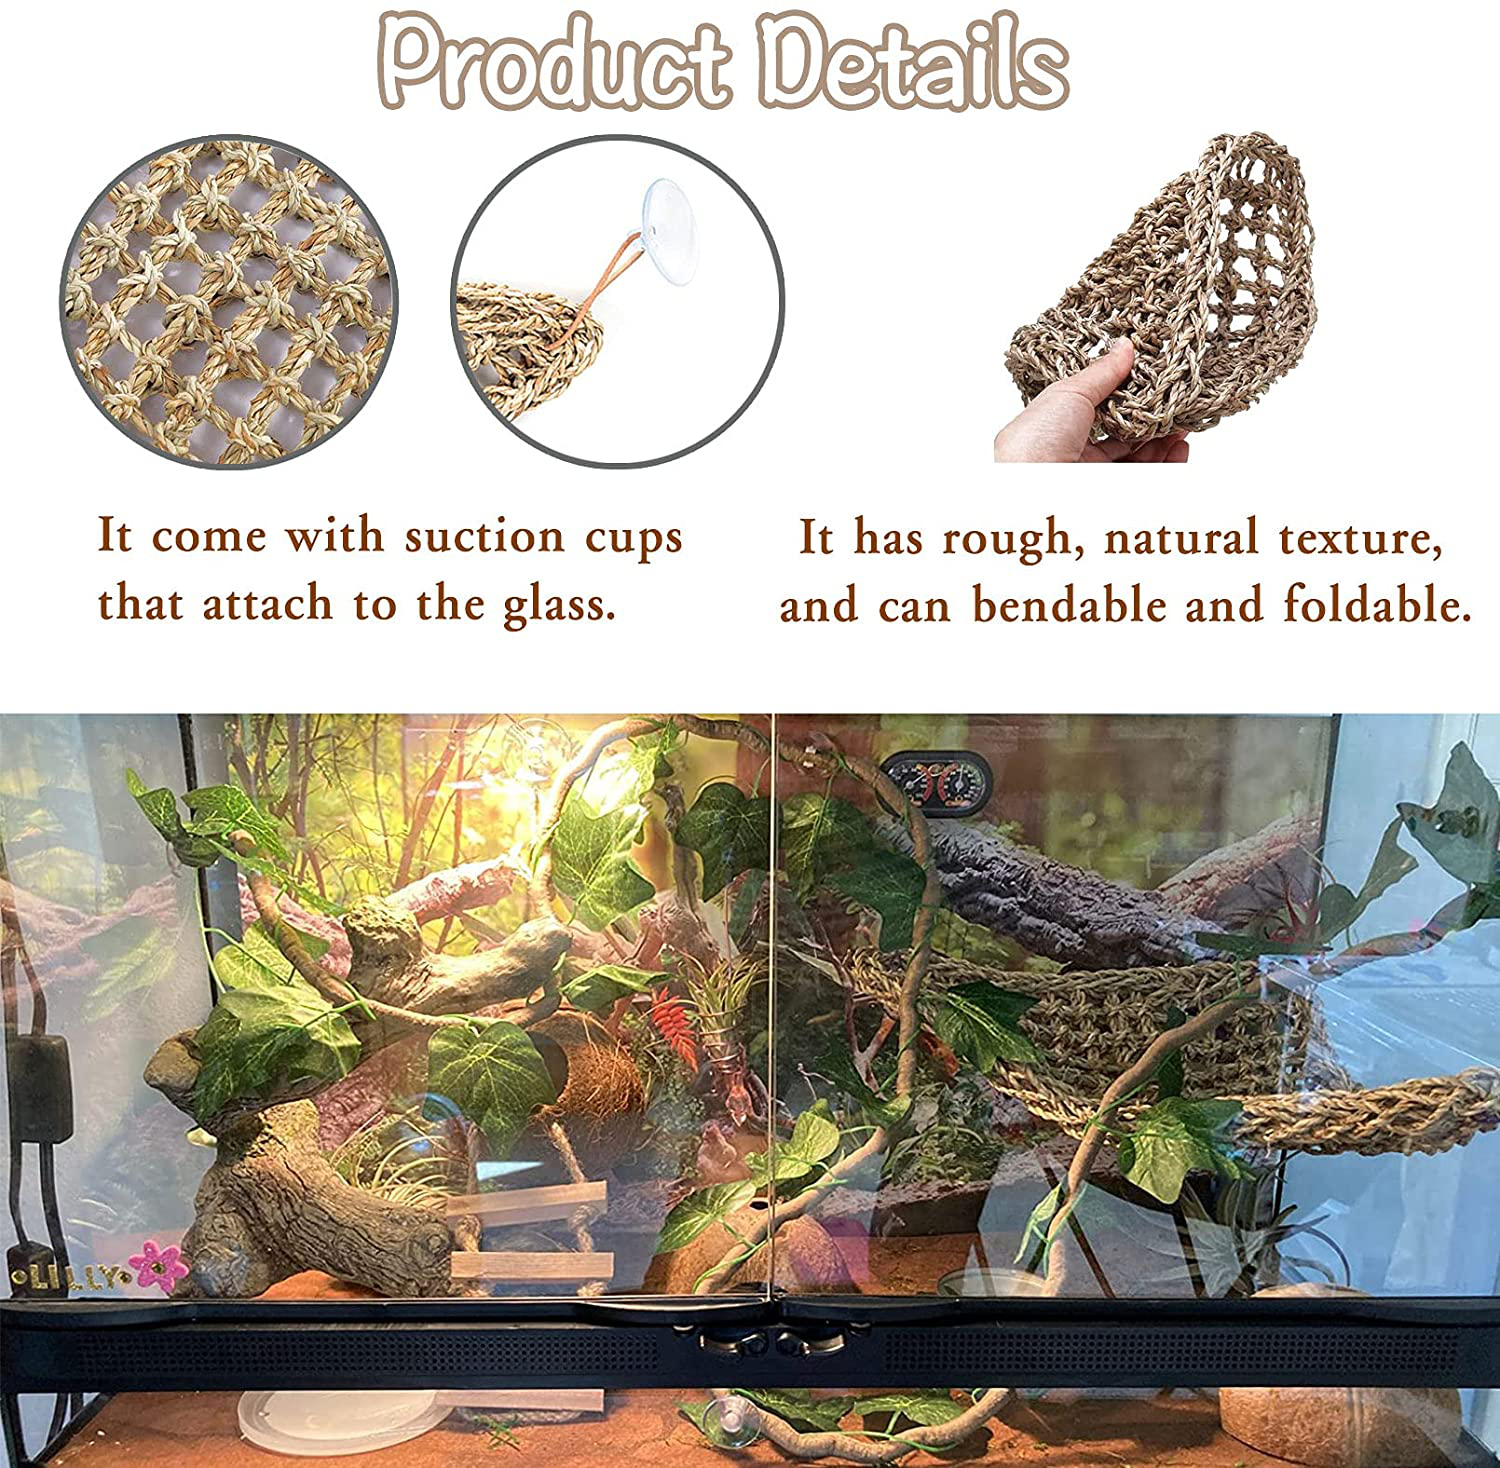 Tfwadmx Bearded Dragon Hammock Lizard Natural Seagrass Habitat Reptile Tank Accessories Jungle Climber Vines Flexible Leaves Decor for Climbing,Chameleon,Hermit Crabs,Gecko,Snakes Animals & Pet Supplies > Pet Supplies > Reptile & Amphibian Supplies > Reptile & Amphibian Habitat Accessories Tfwadmx   